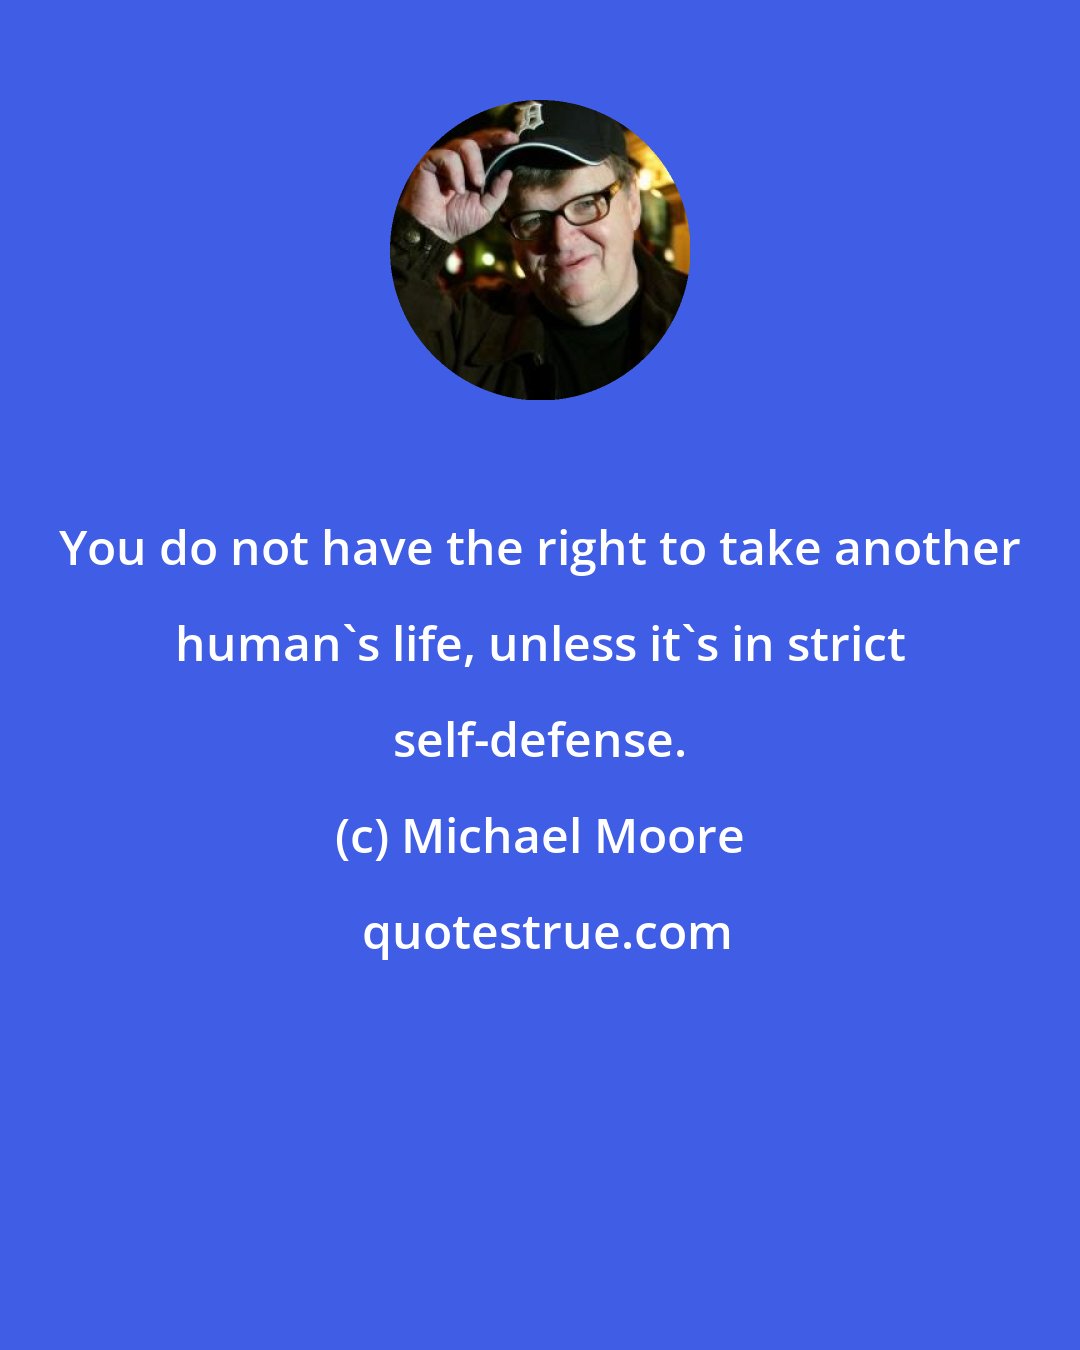 Michael Moore: You do not have the right to take another human's life, unless it's in strict self-defense.